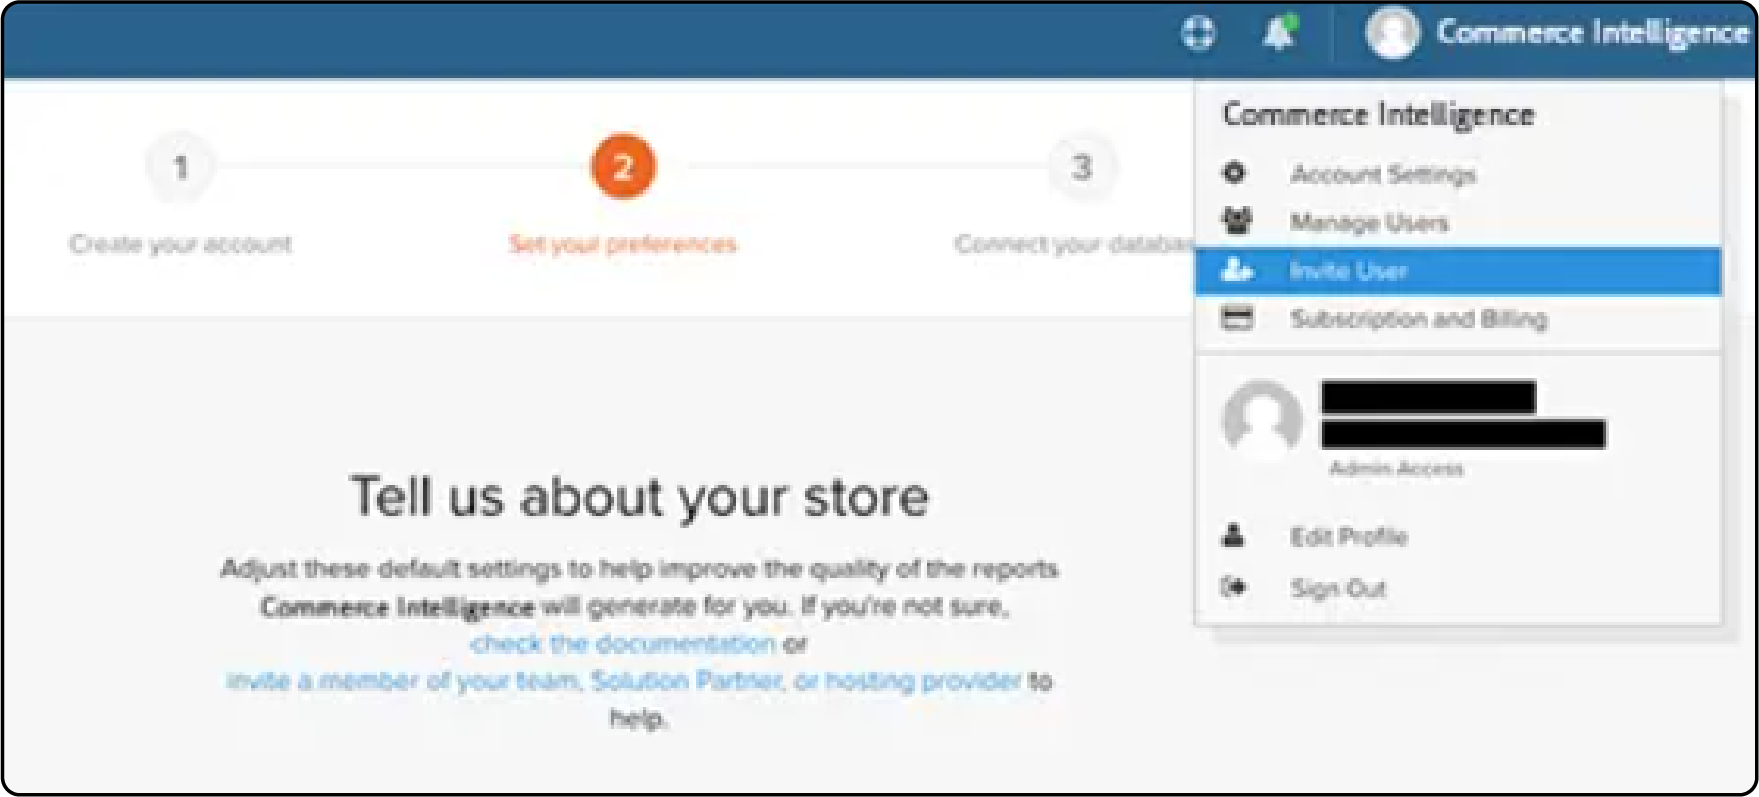 Add Users to Commerce Intelligence